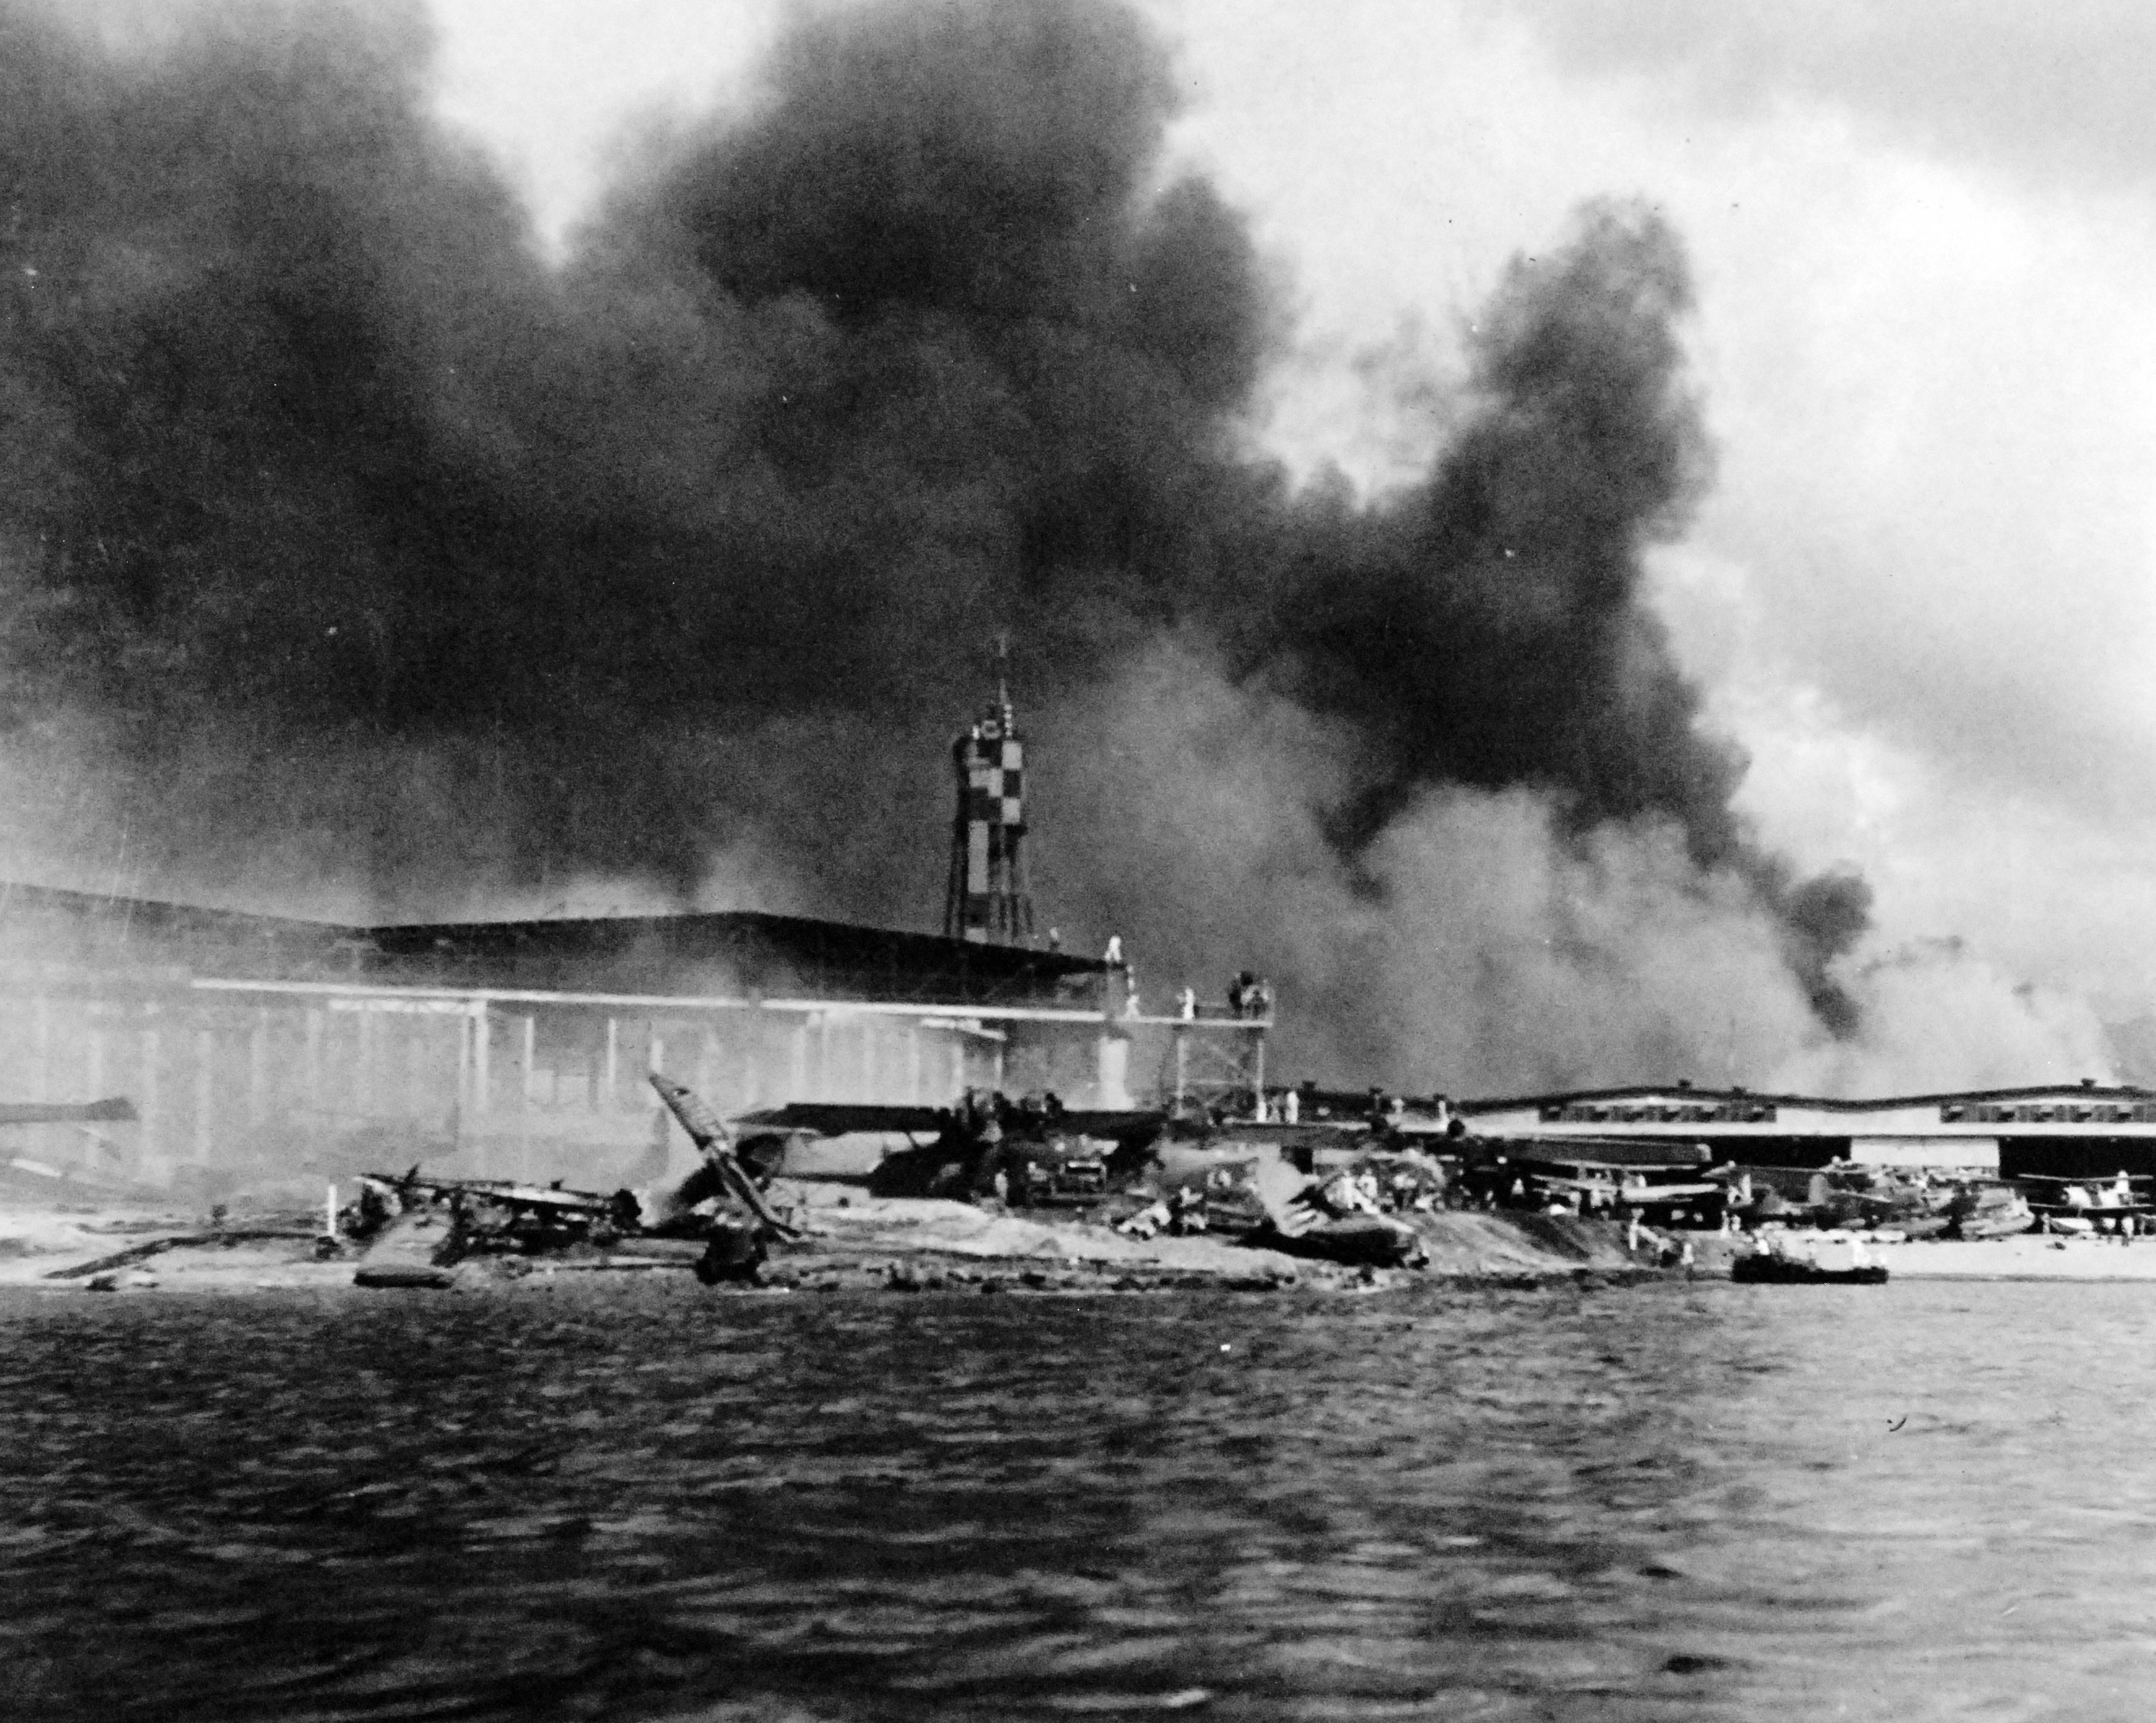 Damaged PBY Catalinas on the seaplane ramp of Ford Island, Pearl Harbor, Oahu, Hawaii, Dec 7, 1941. White smoke from burning hangars and black smoke from burning battleships is also visible.